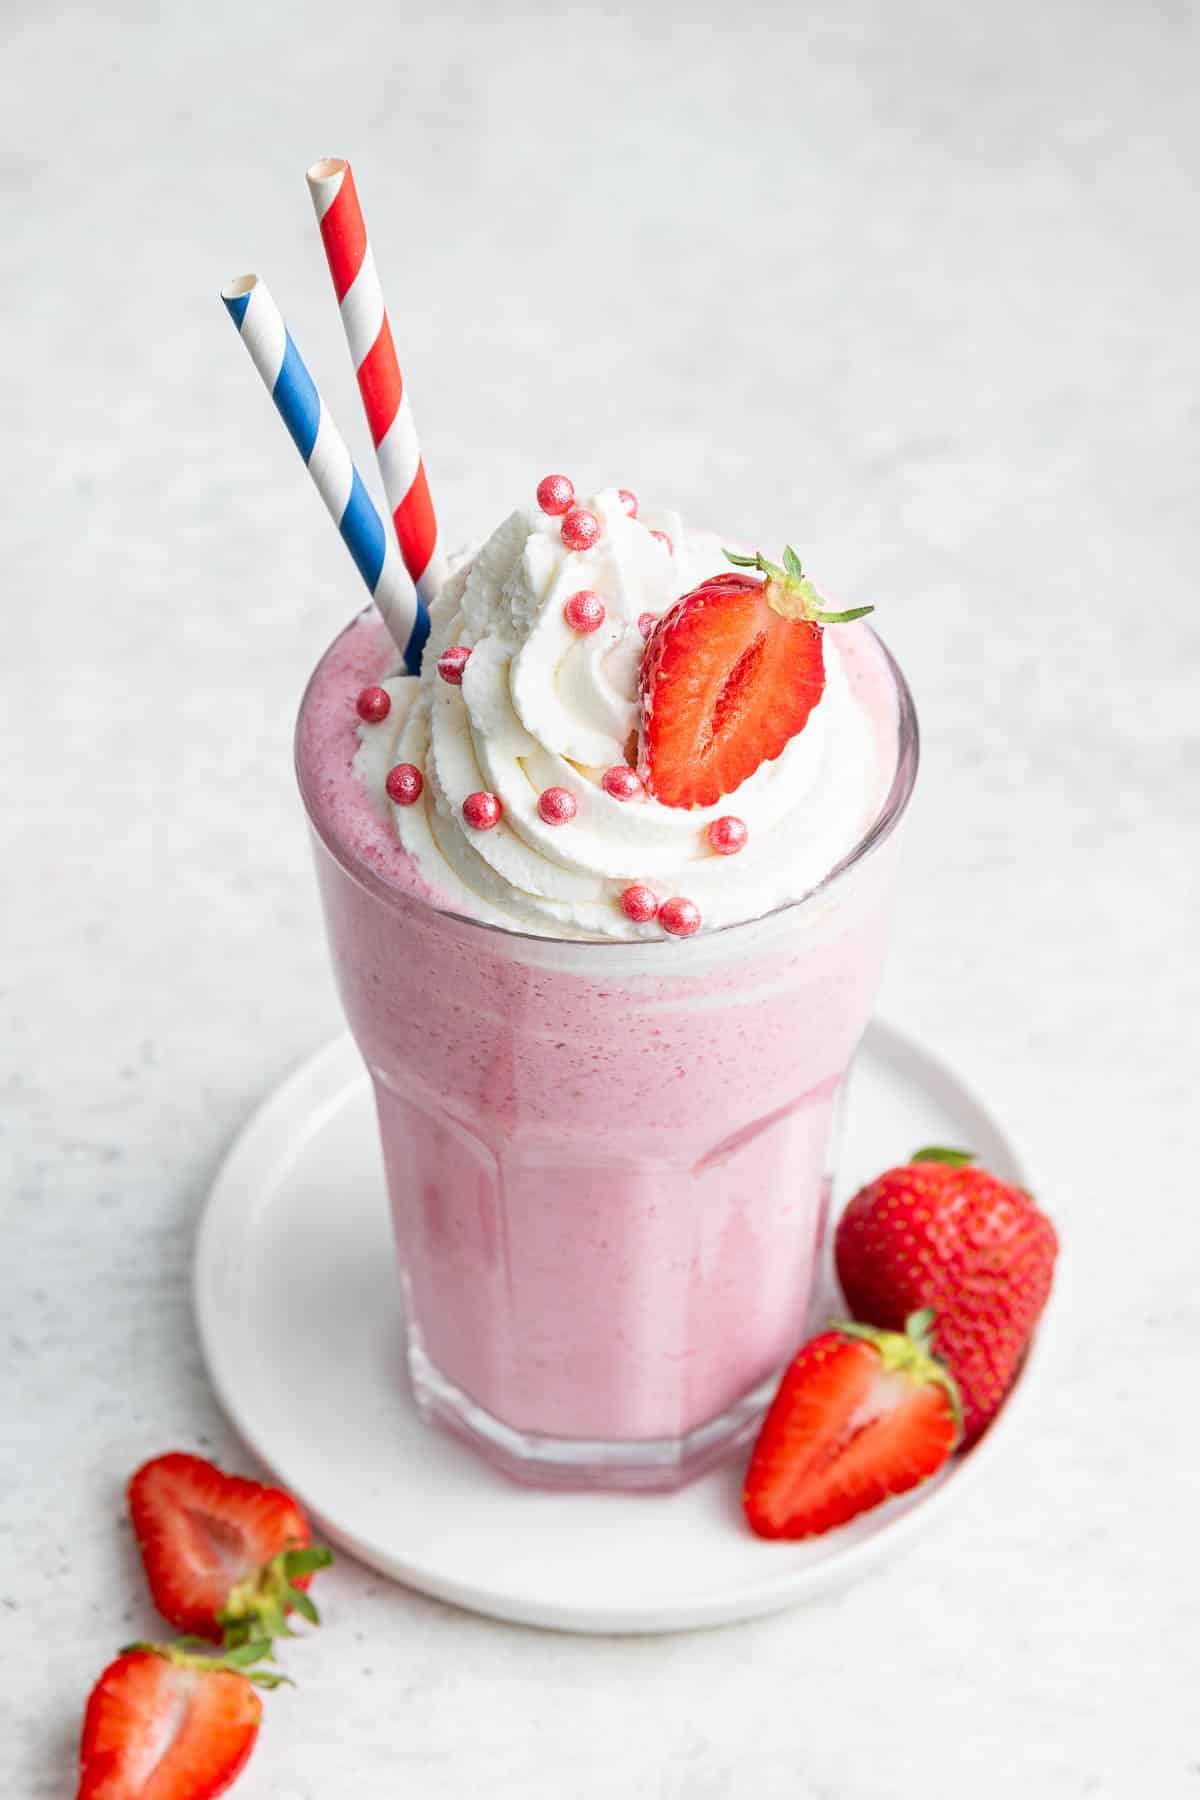 how to make a smoothie with ice cream and milk